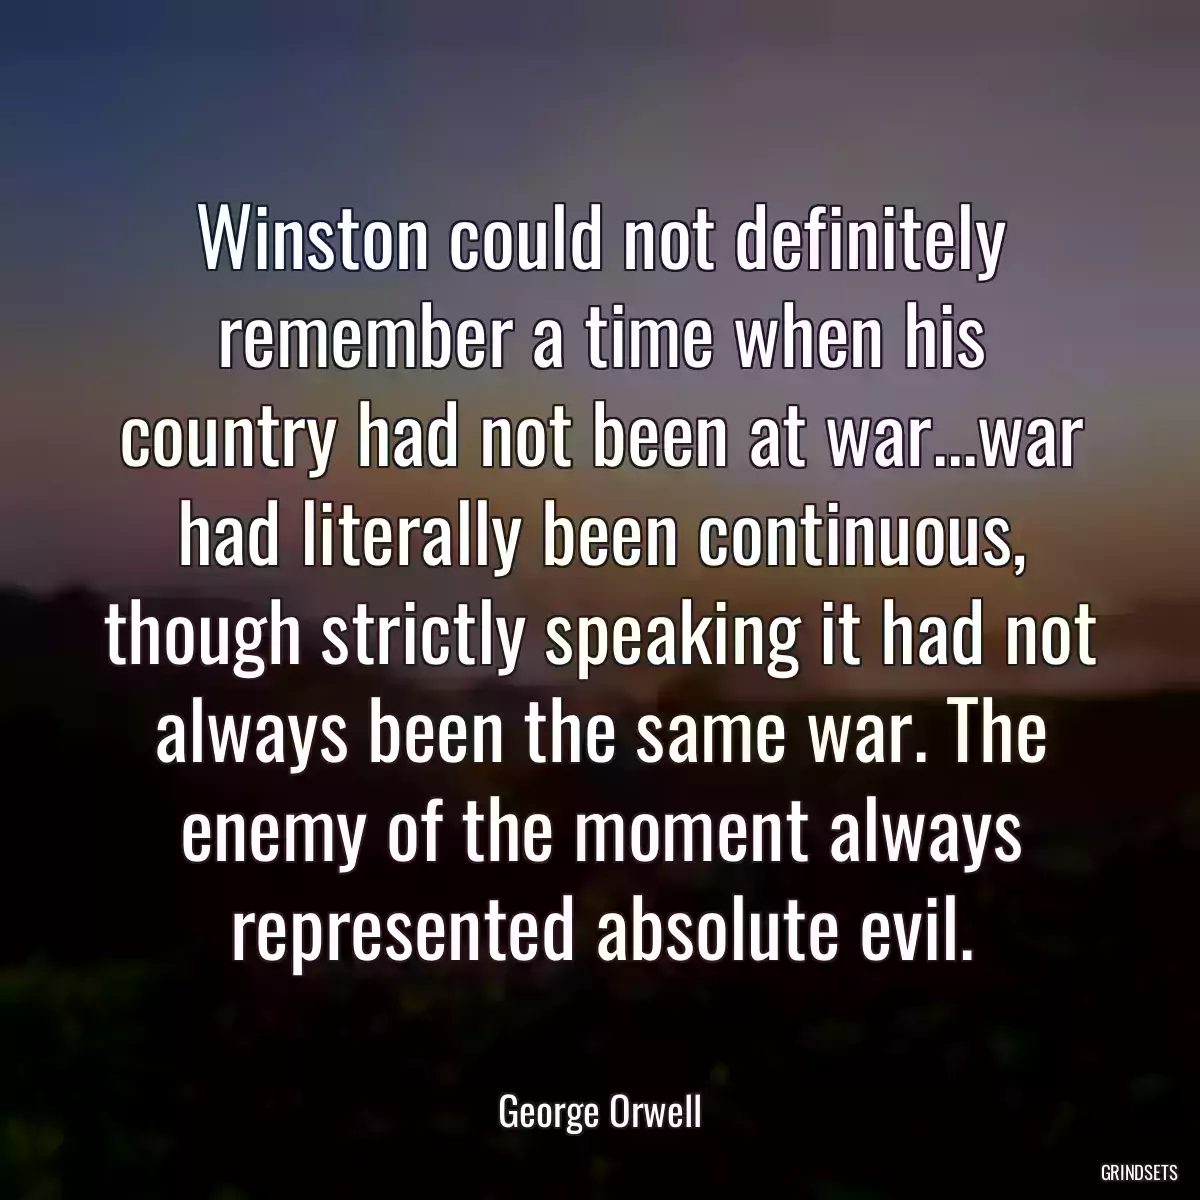 Winston could not definitely remember a time when his country had not been at war...war had literally been continuous, though strictly speaking it had not always been the same war. The enemy of the moment always represented absolute evil.